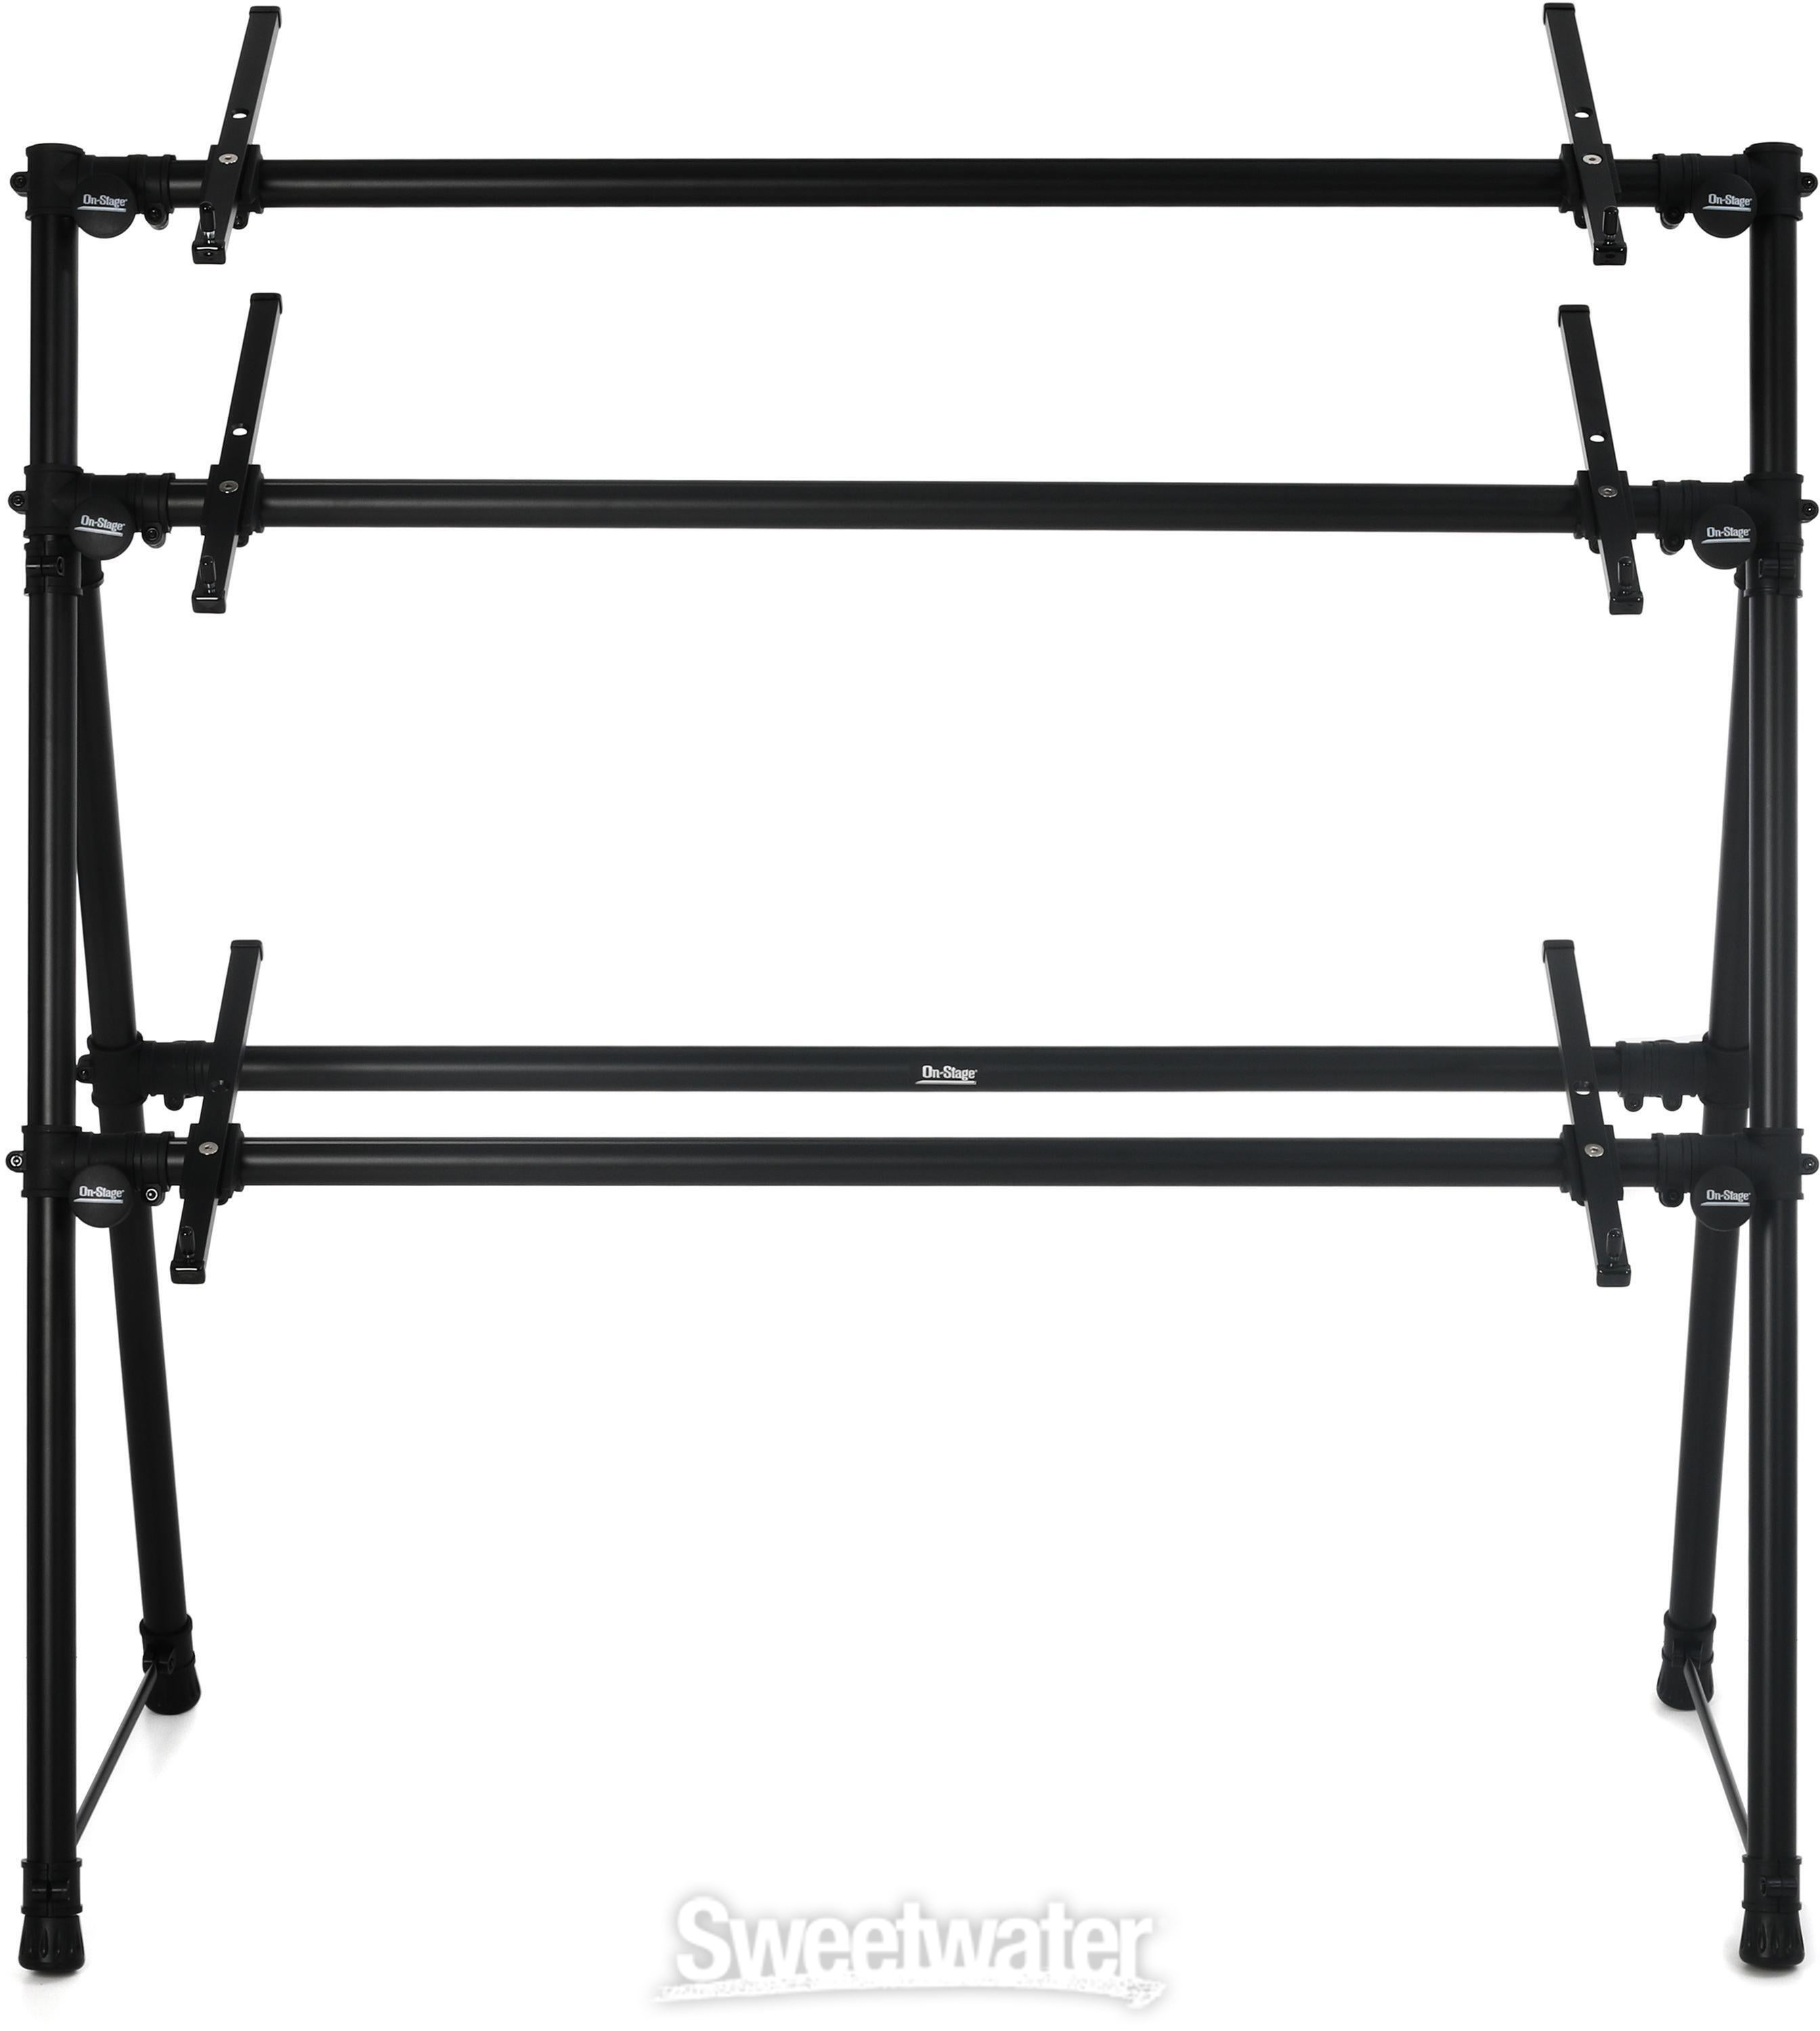 On-Stage KS7903 3-Tier A-Frame Keyboard Stand | Sweetwater